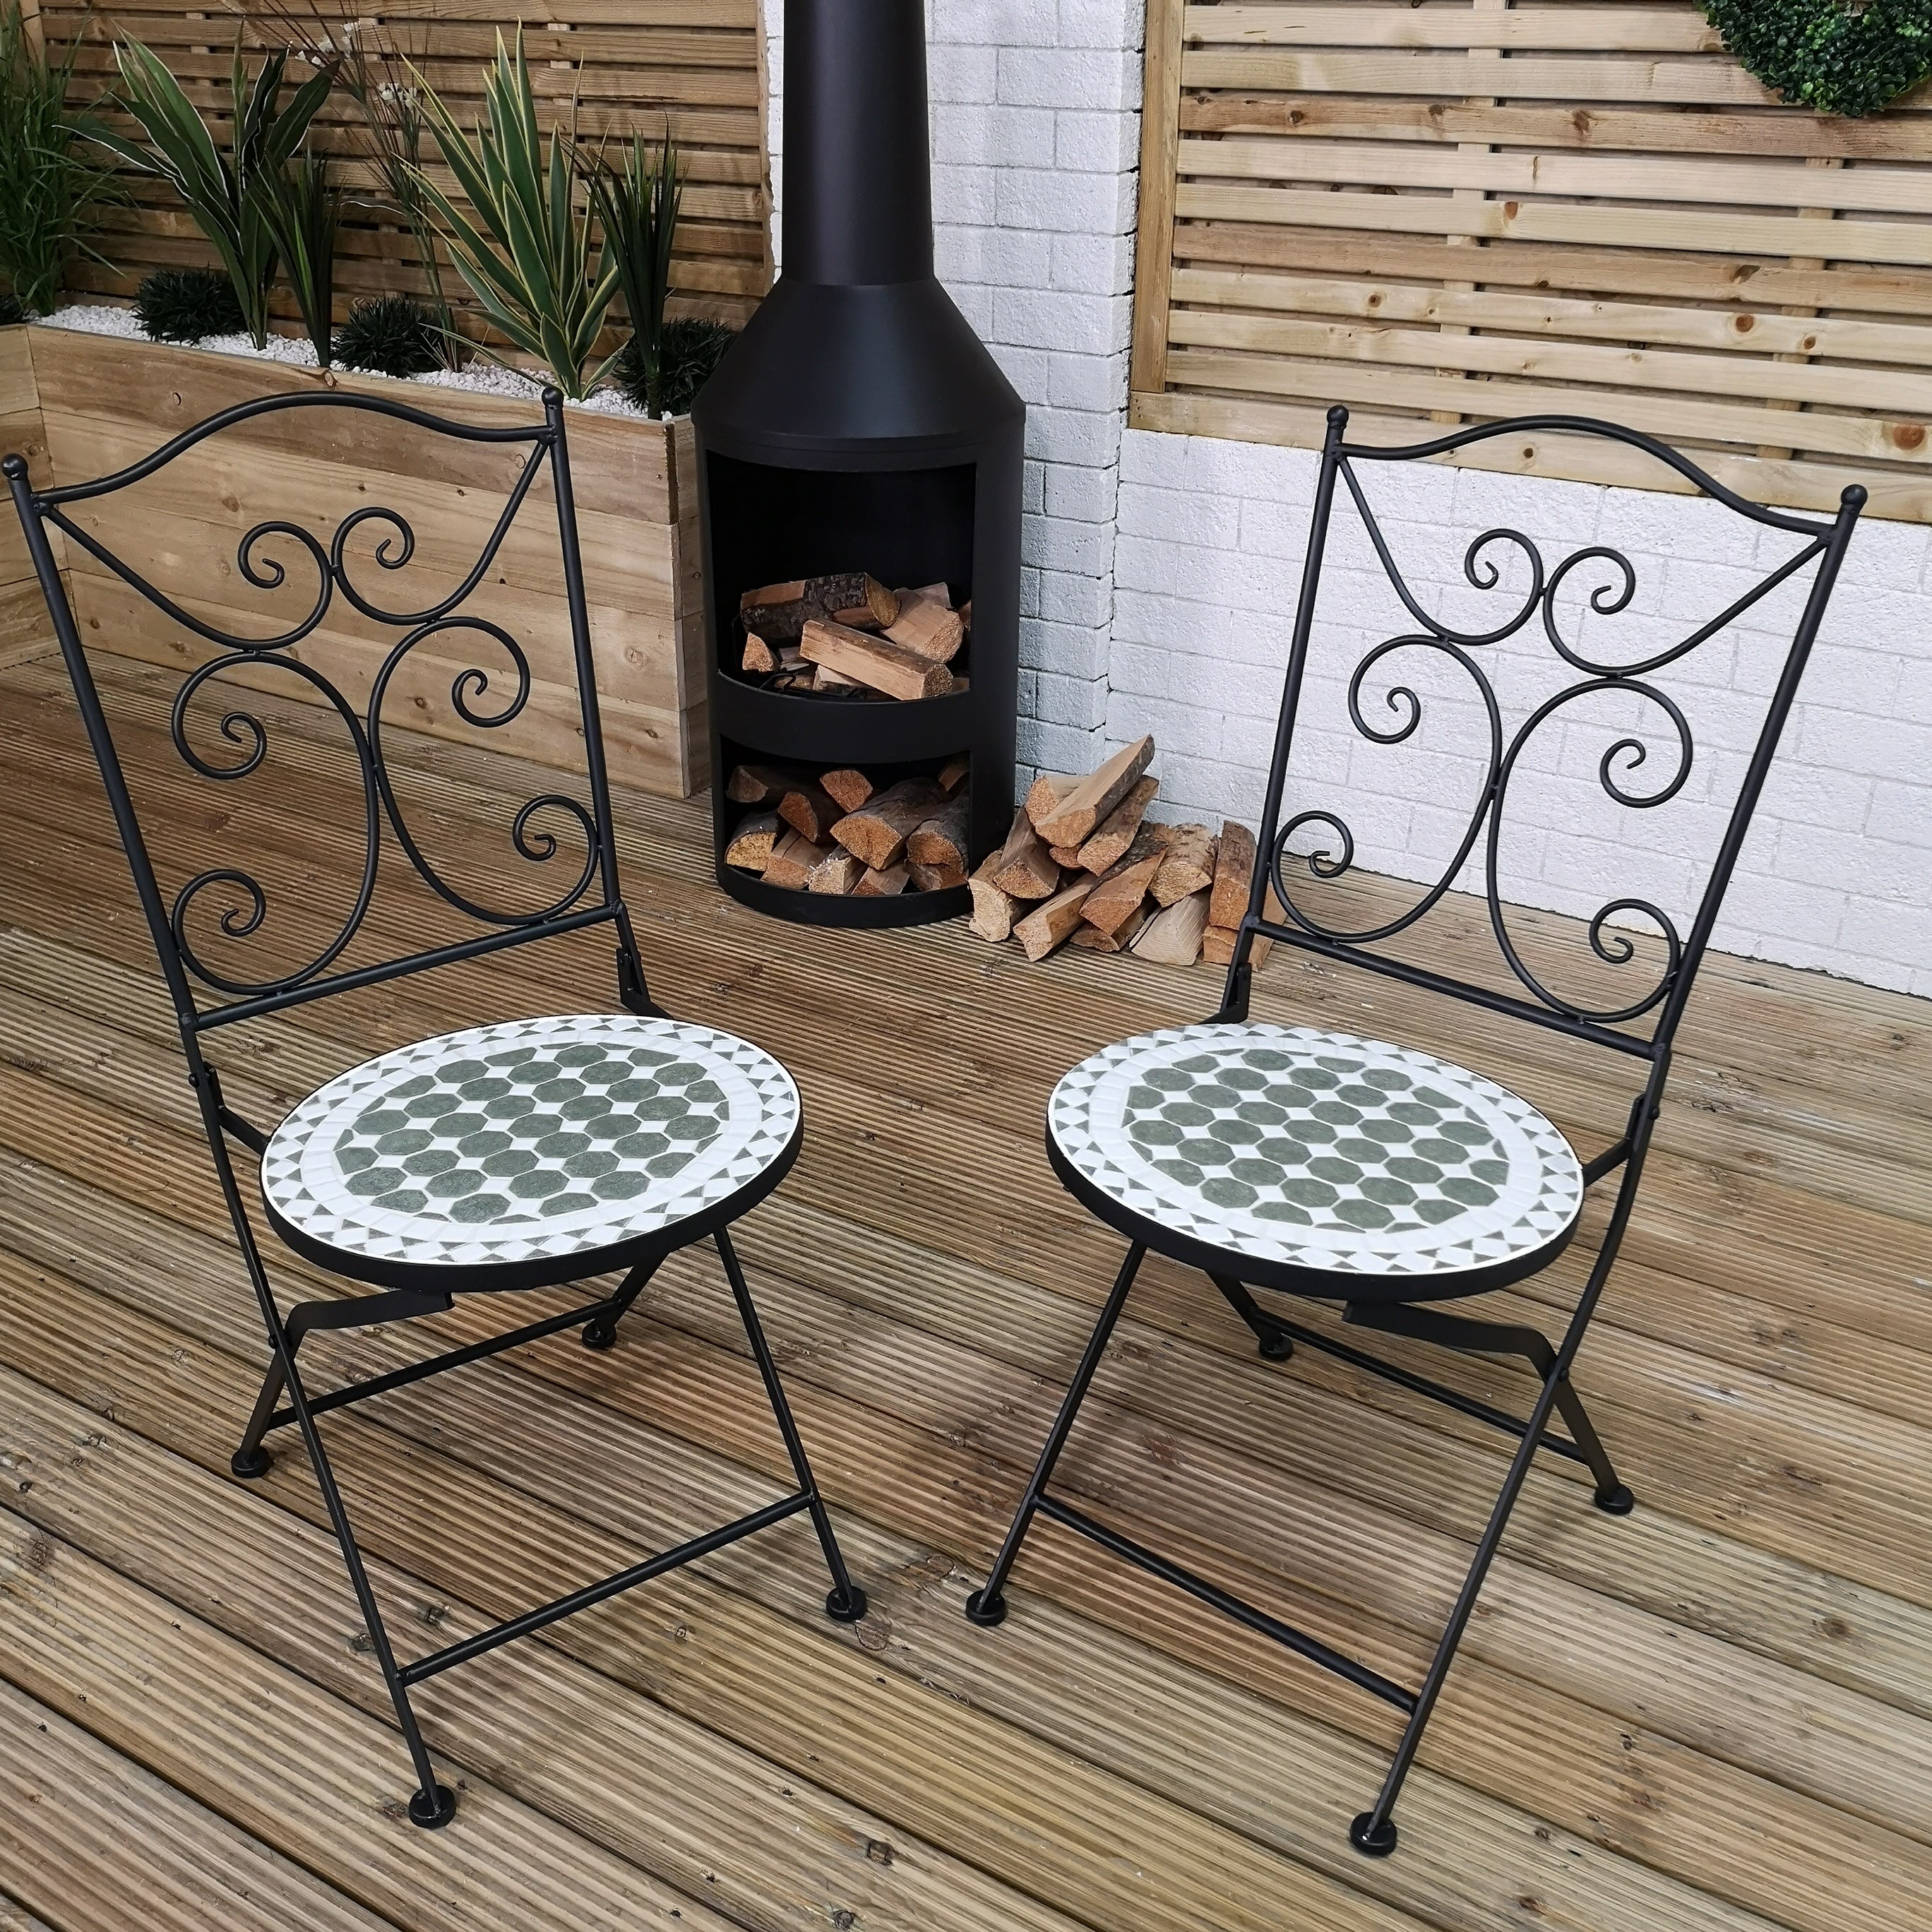 Outdoor Bistro Table and 2 Chairs Set Ceramic Design for Garden Patio Balcony